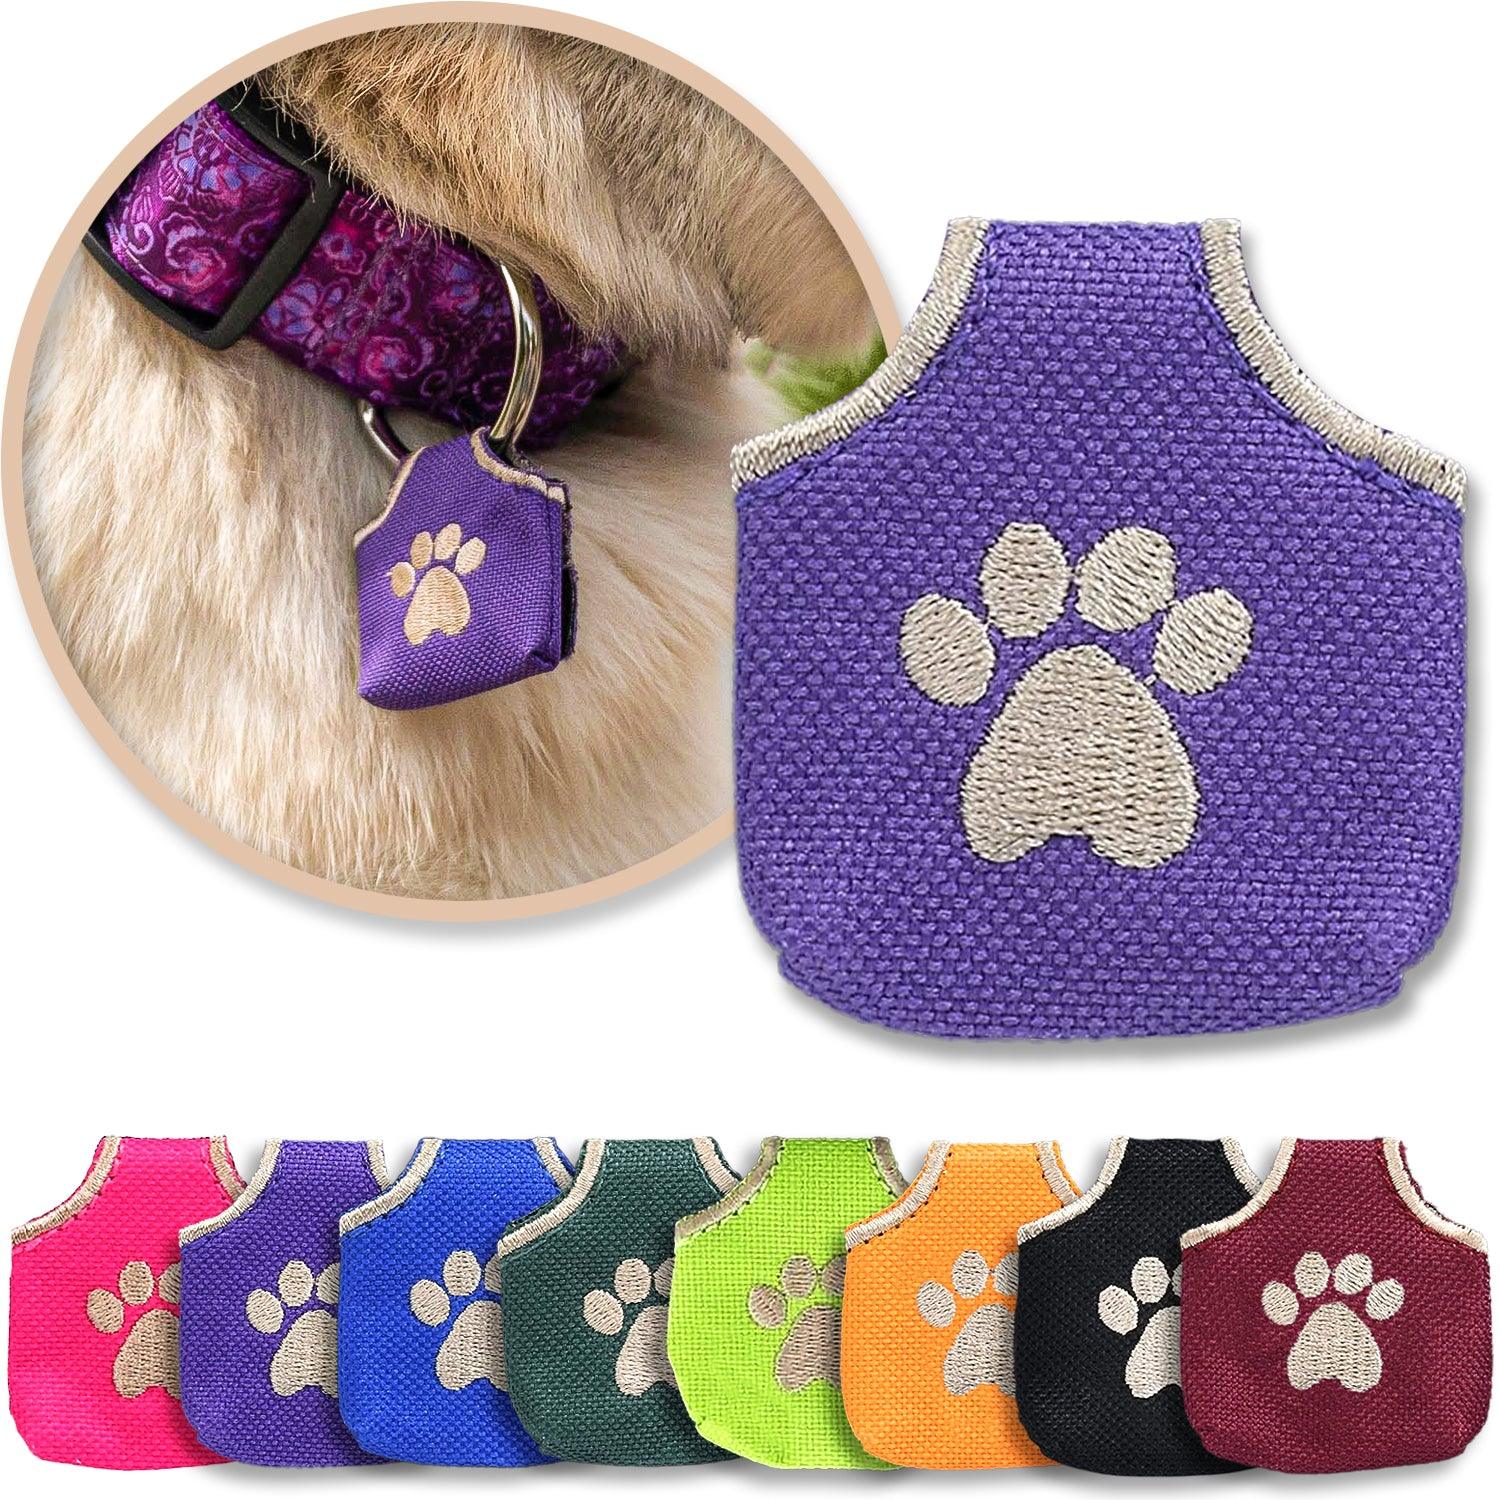 Purple pet tag silencer shown with other color options